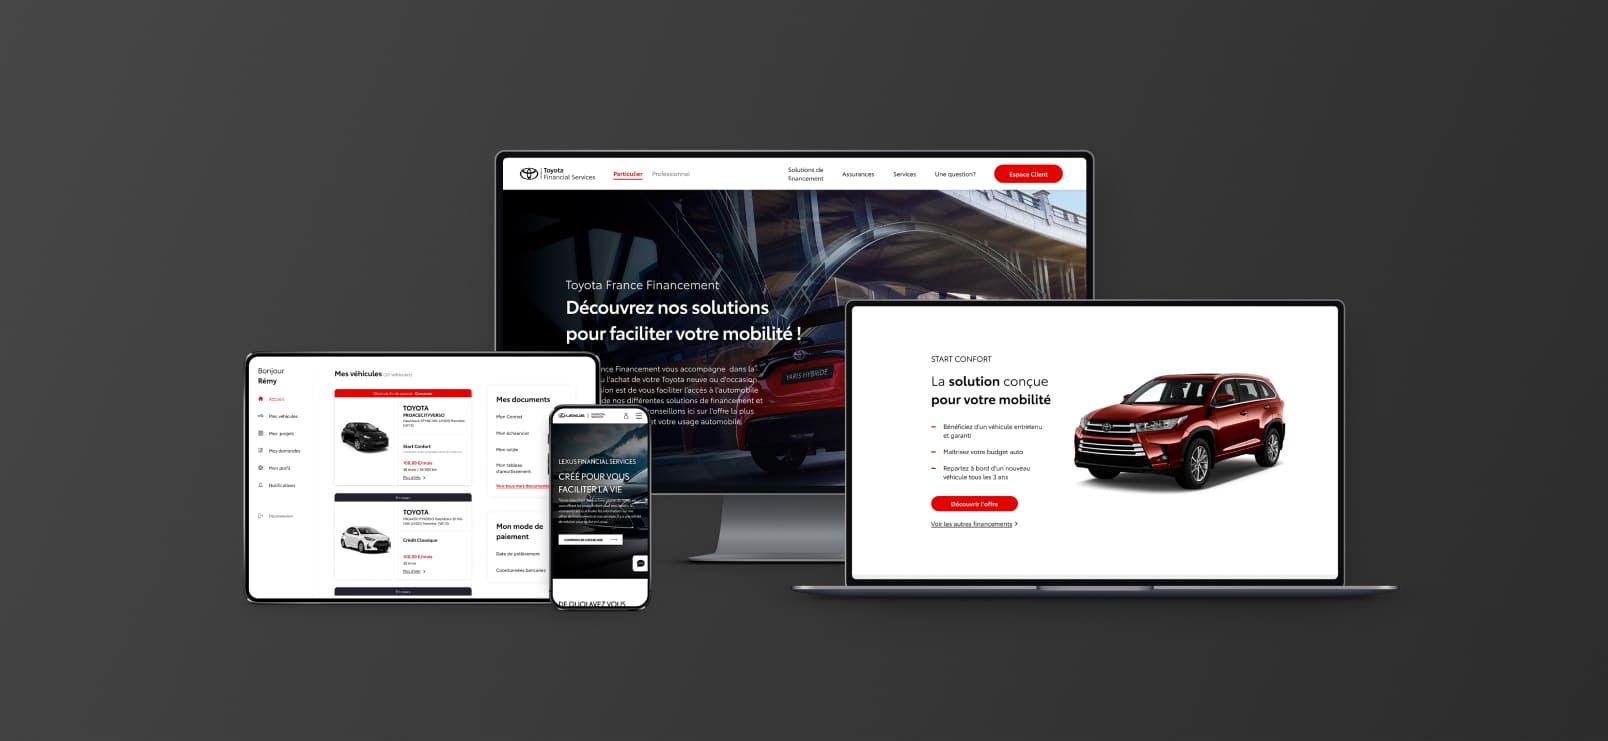 Toyota financial website adjustments to financial statements